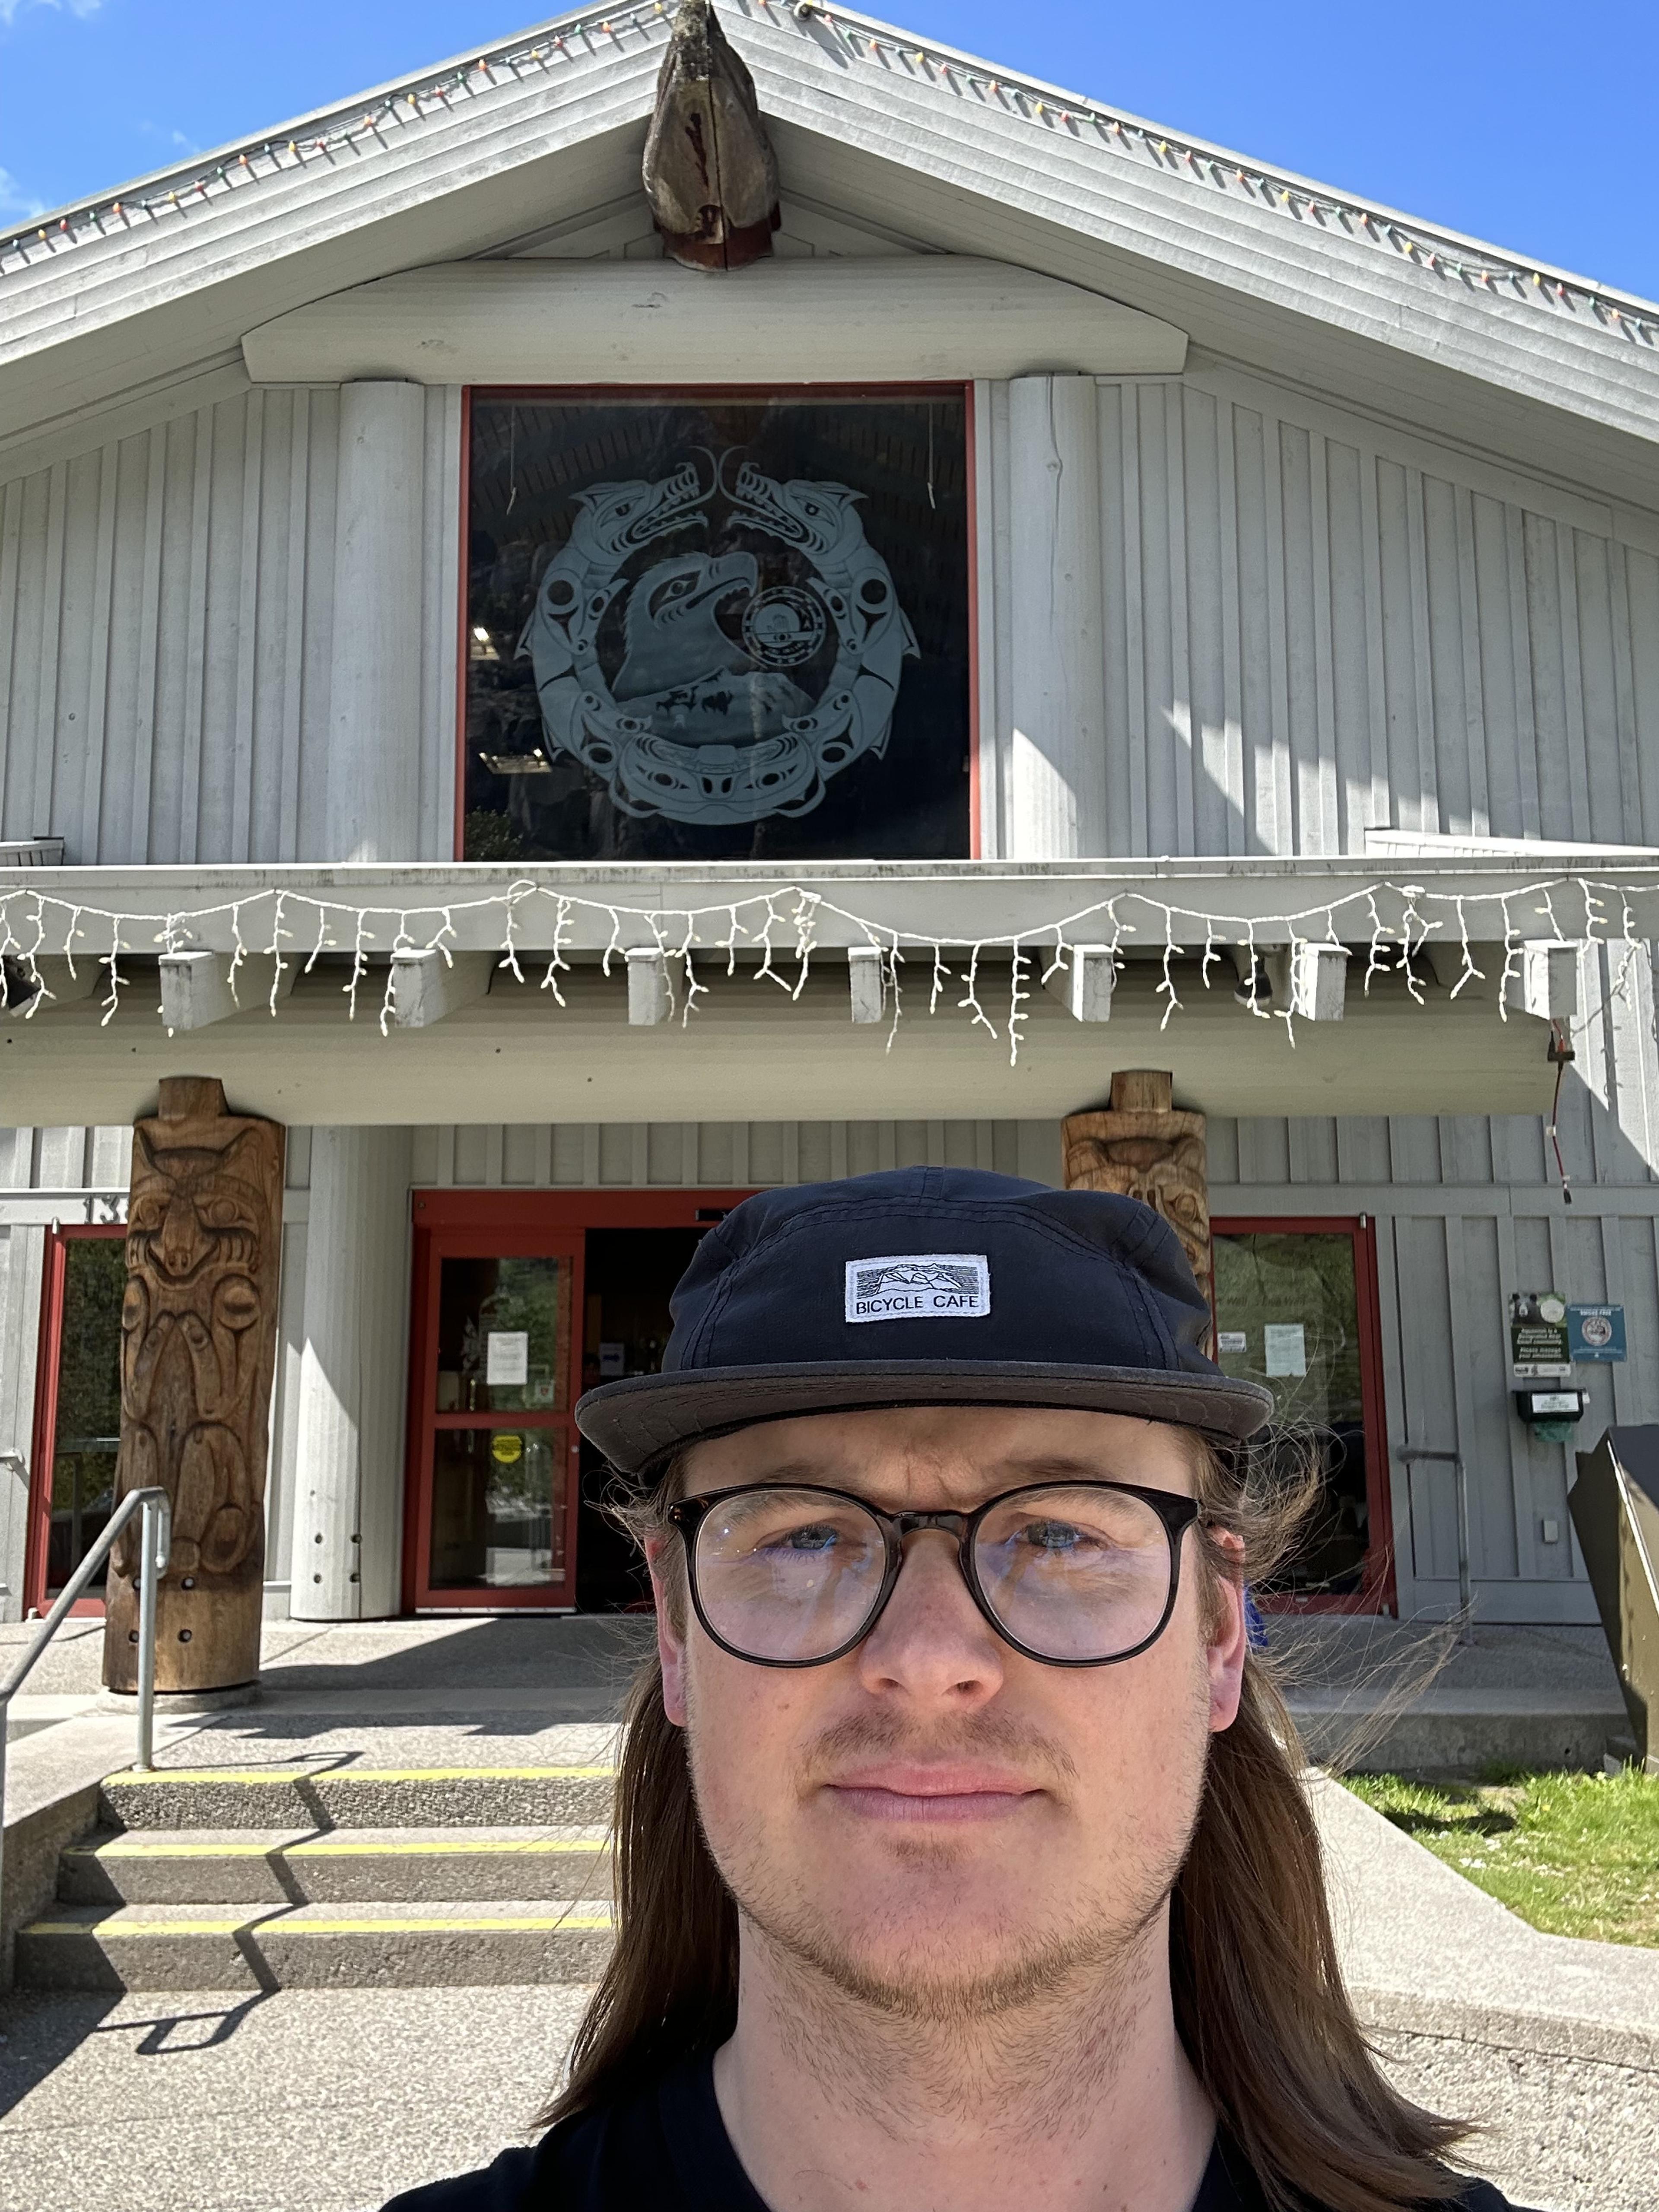 Sam's selfie game is strong 🤳🏽 at Squamish Totem Hall